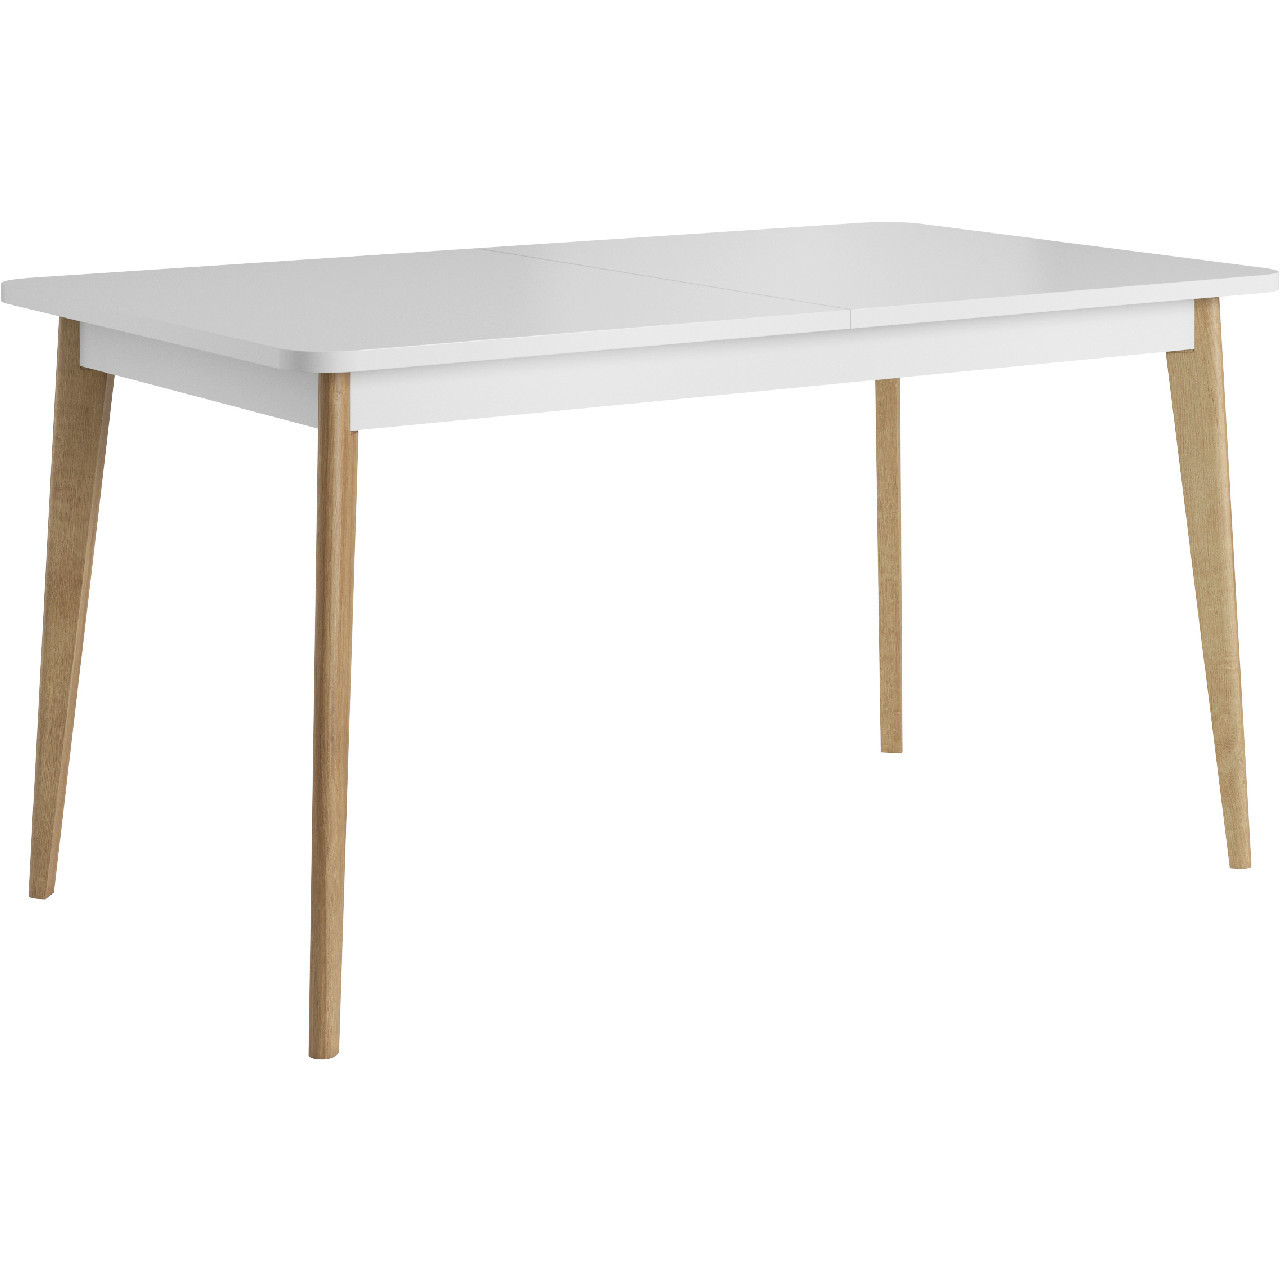 Extendable dining table PRIMO 10 riviera oak / white